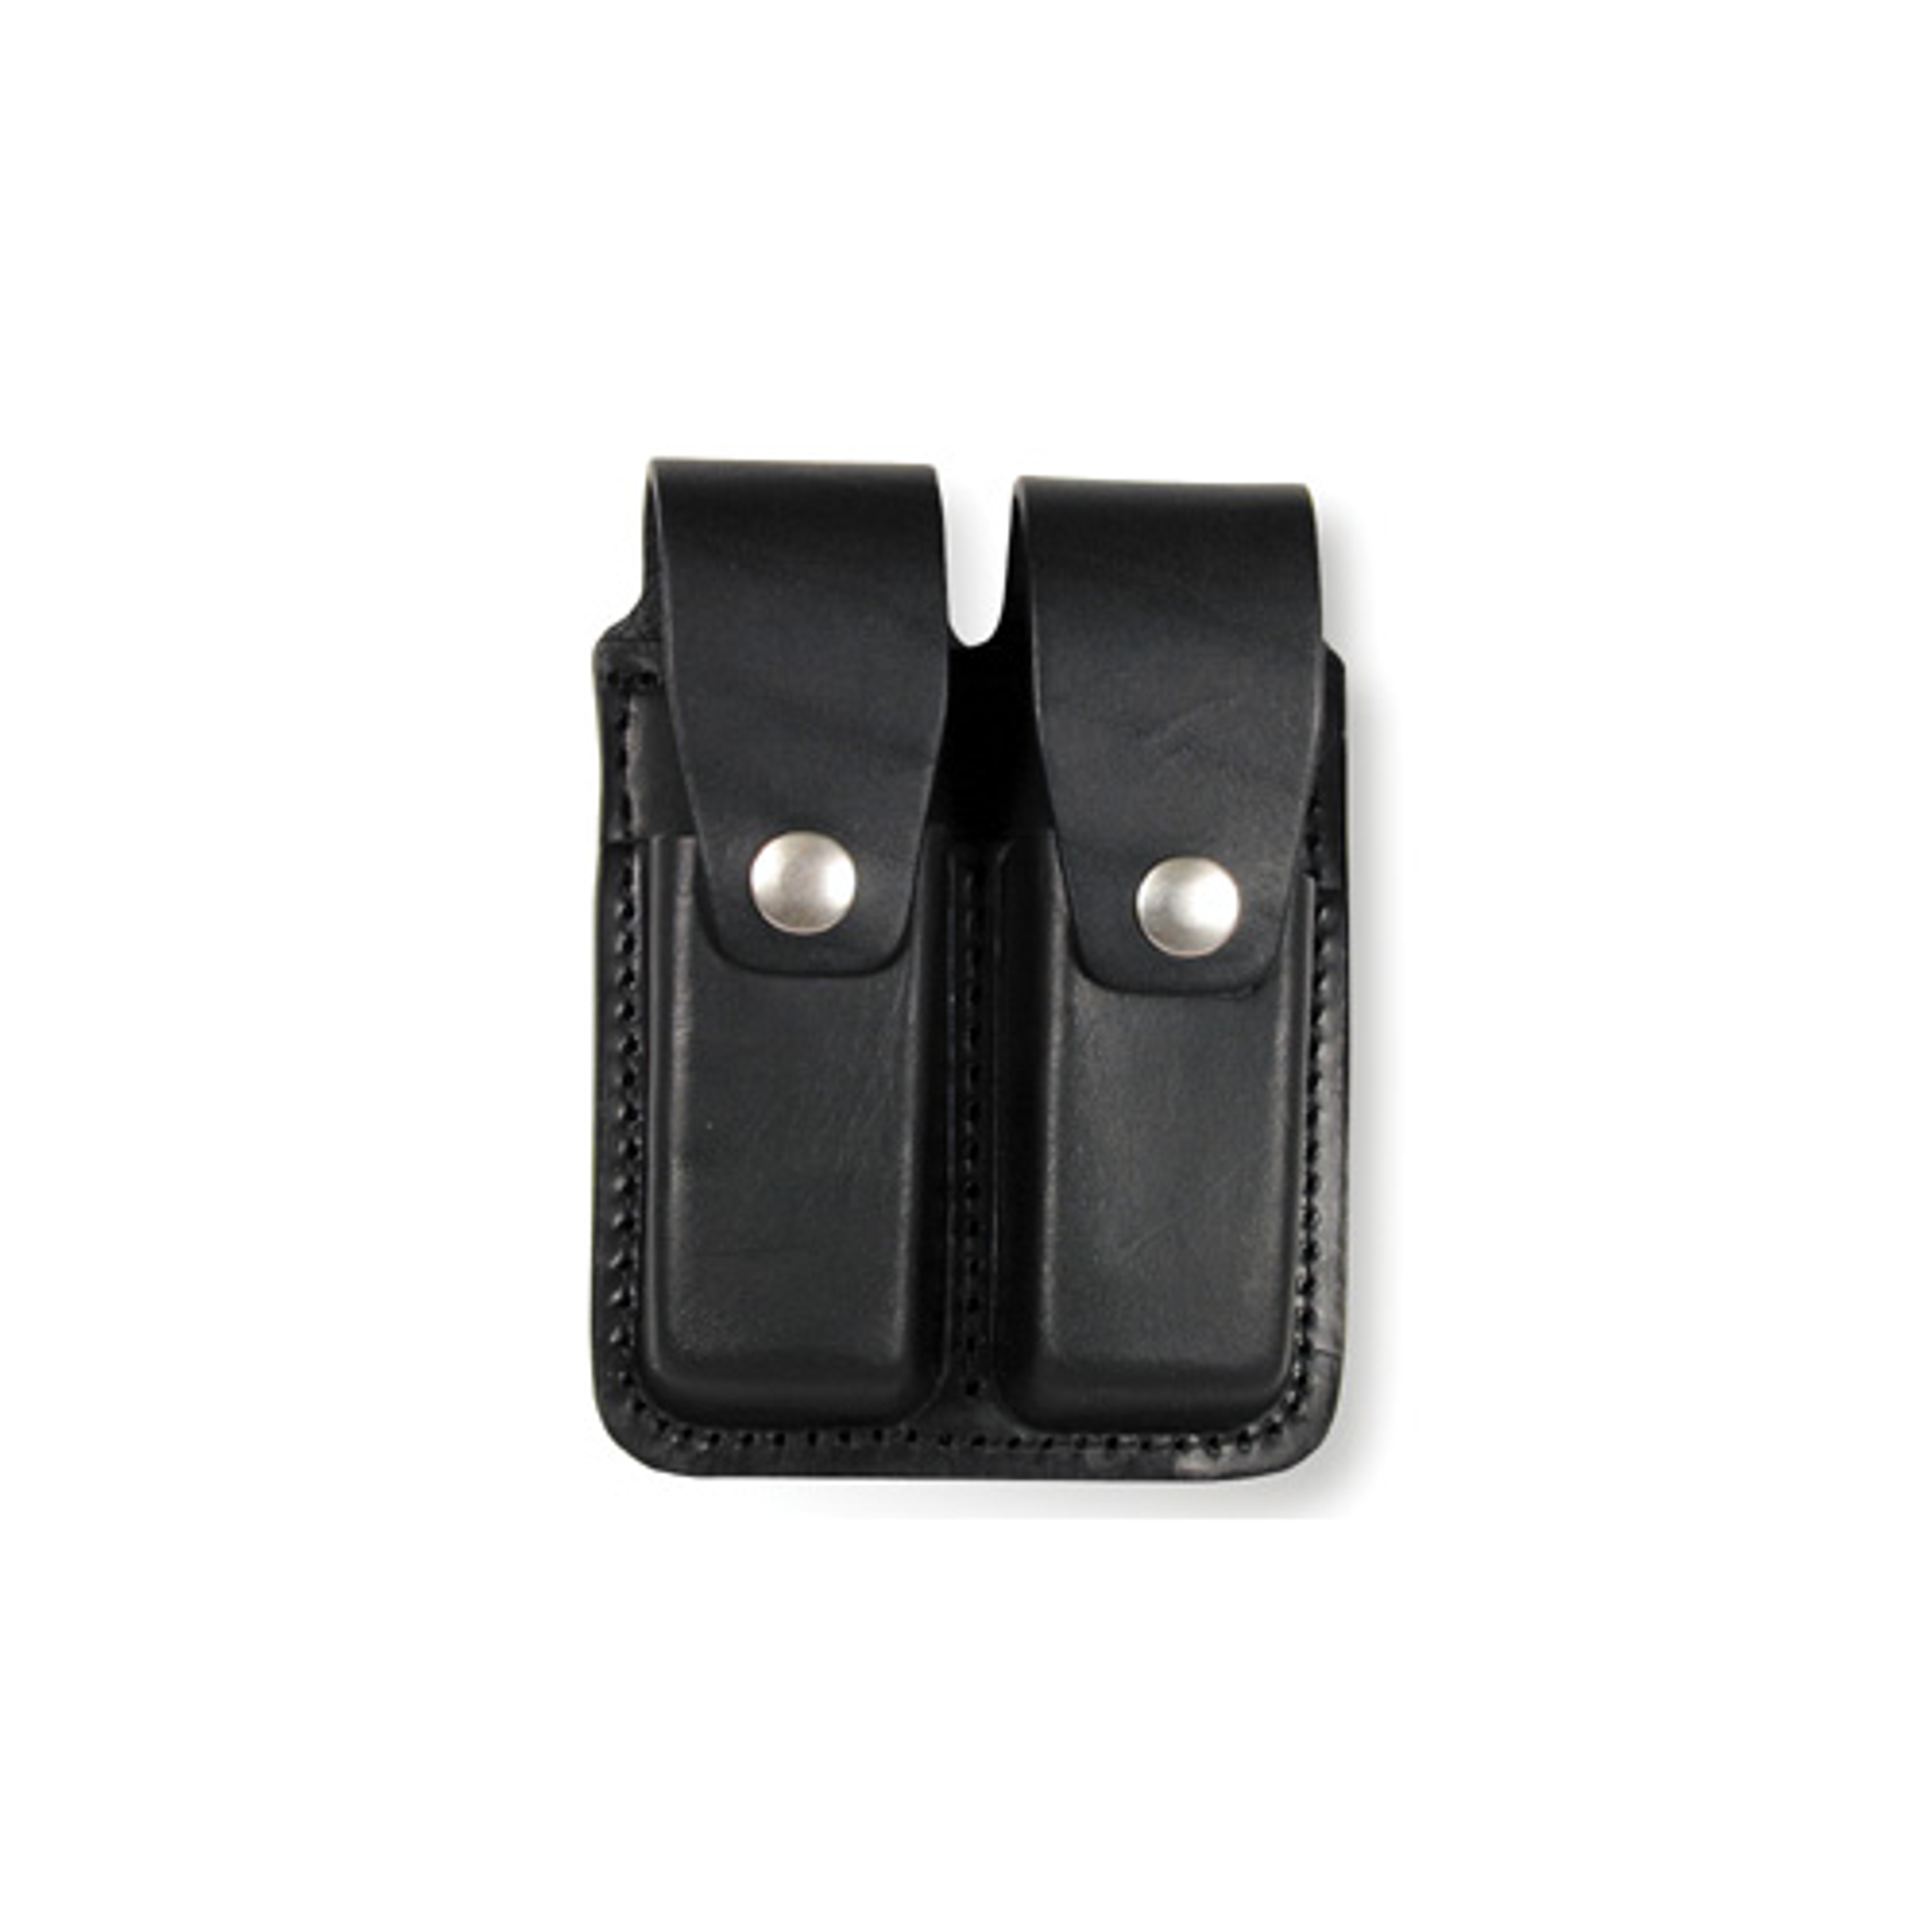 Double Mag Holder For 9mm/40cal. - KR5601-2-GLD